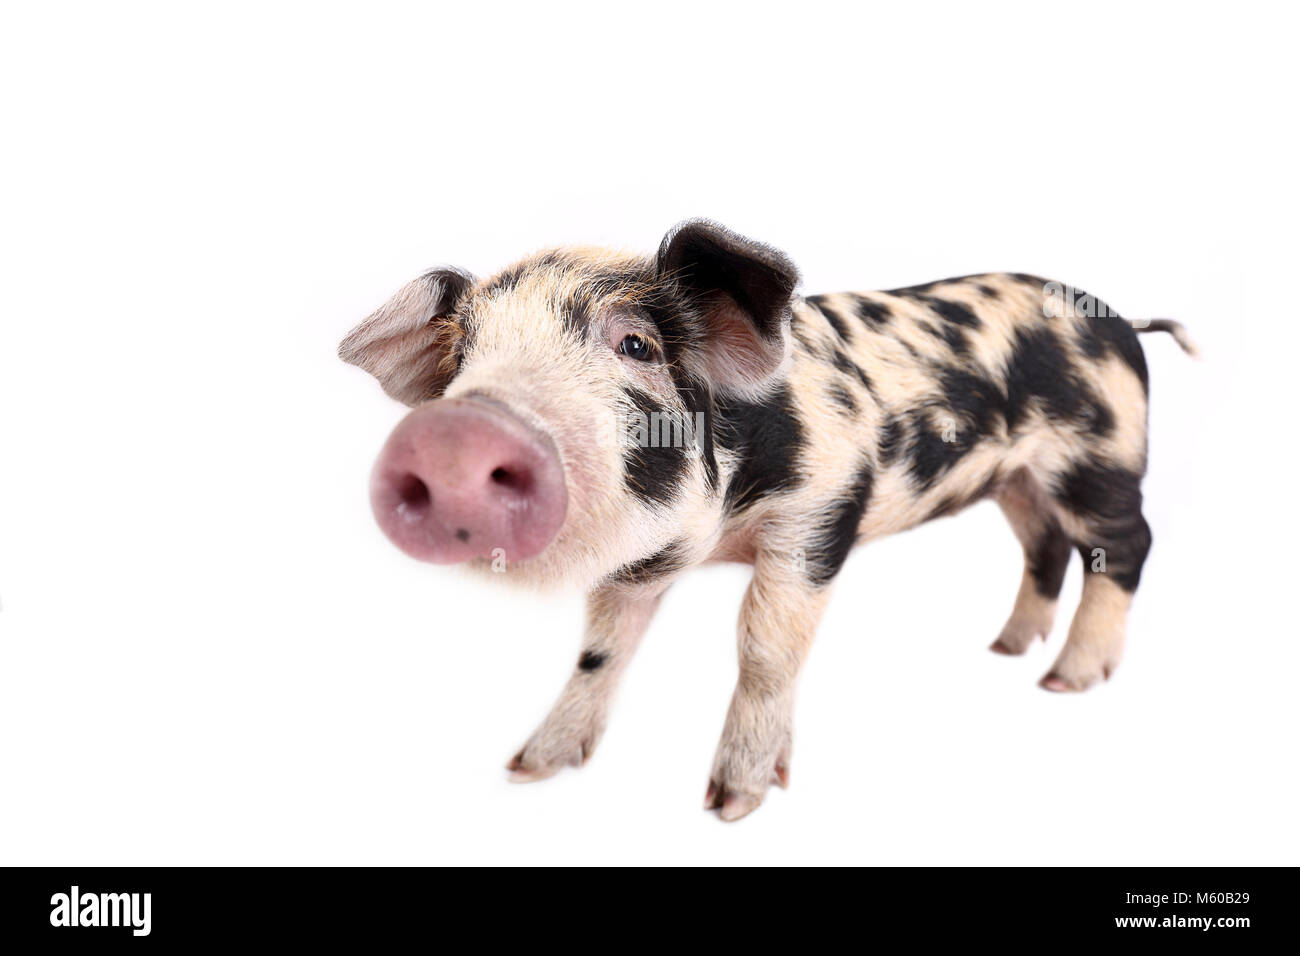 Domestic Pig, Turopolje x ?. Piglet (4 weeks old) standing. Studio picture seen against a white background. Germany Stock Photo